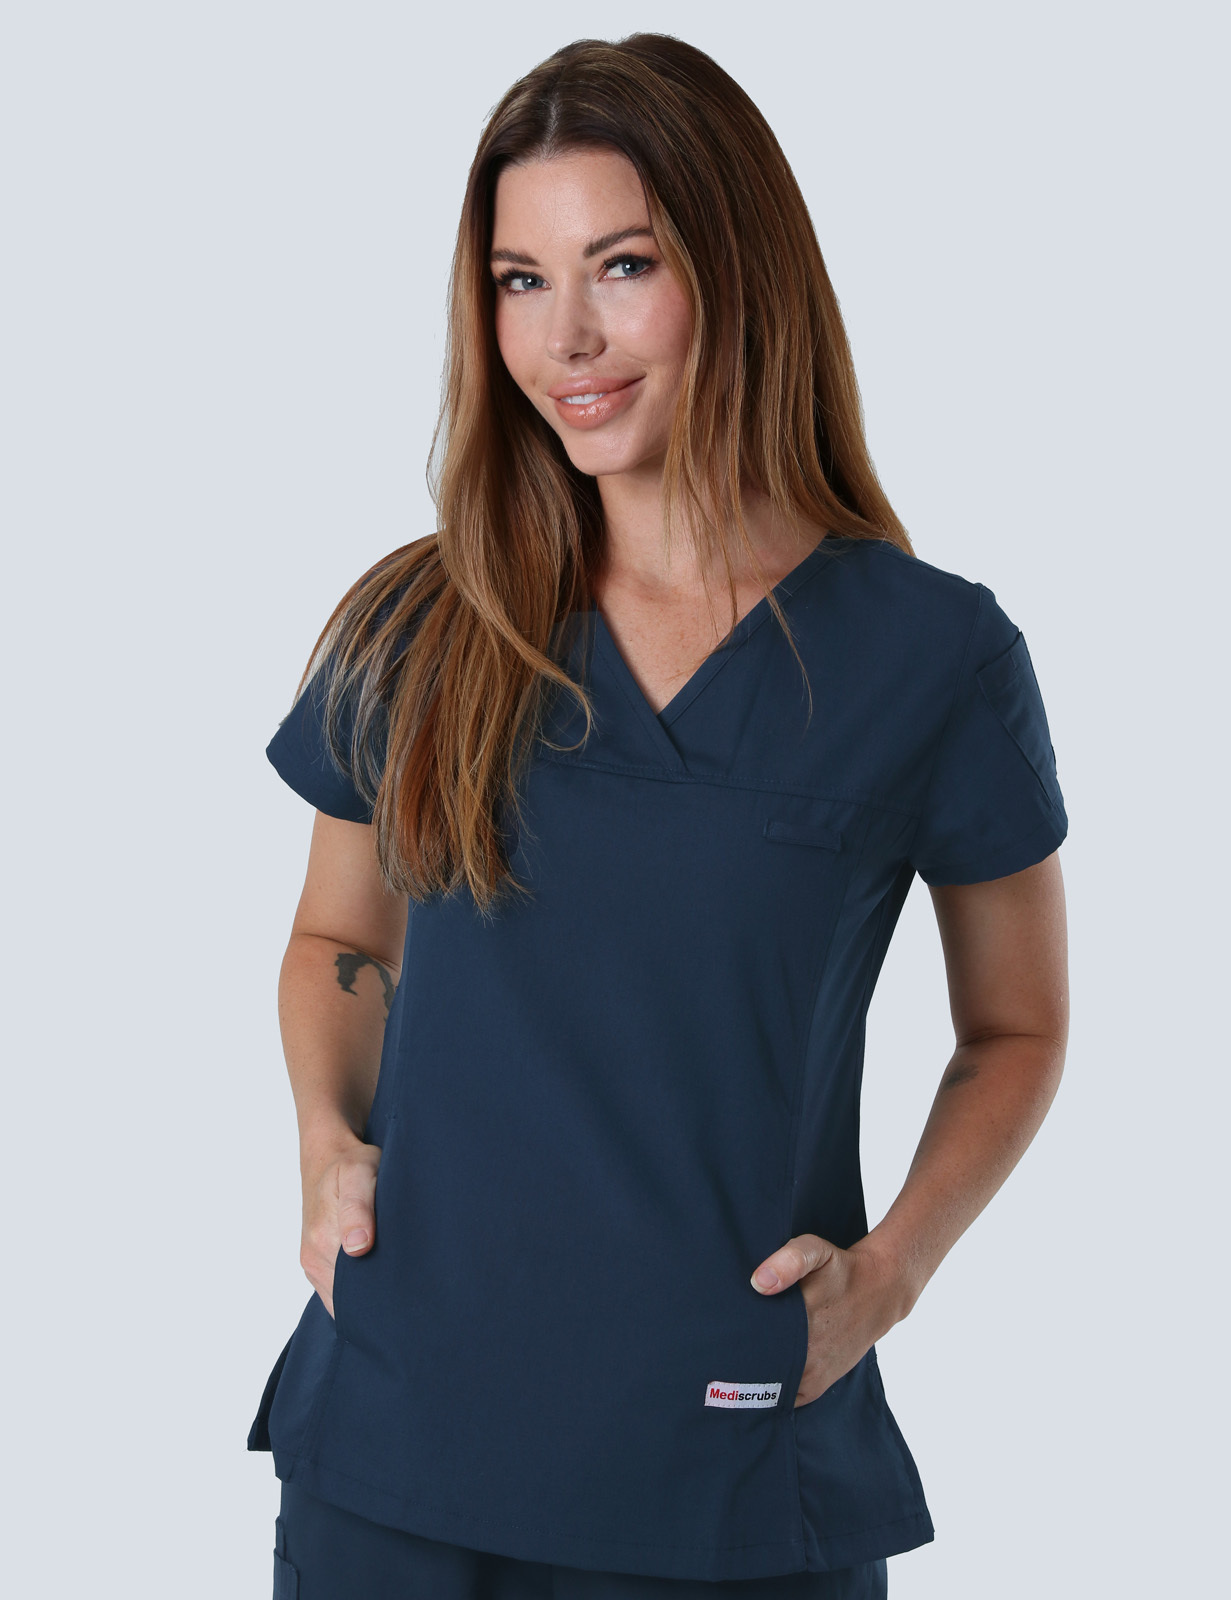 Melbourne Hospital - RN (Women's Fit Solid Scrub Top and Cargo Pants in Navy incl Logos)